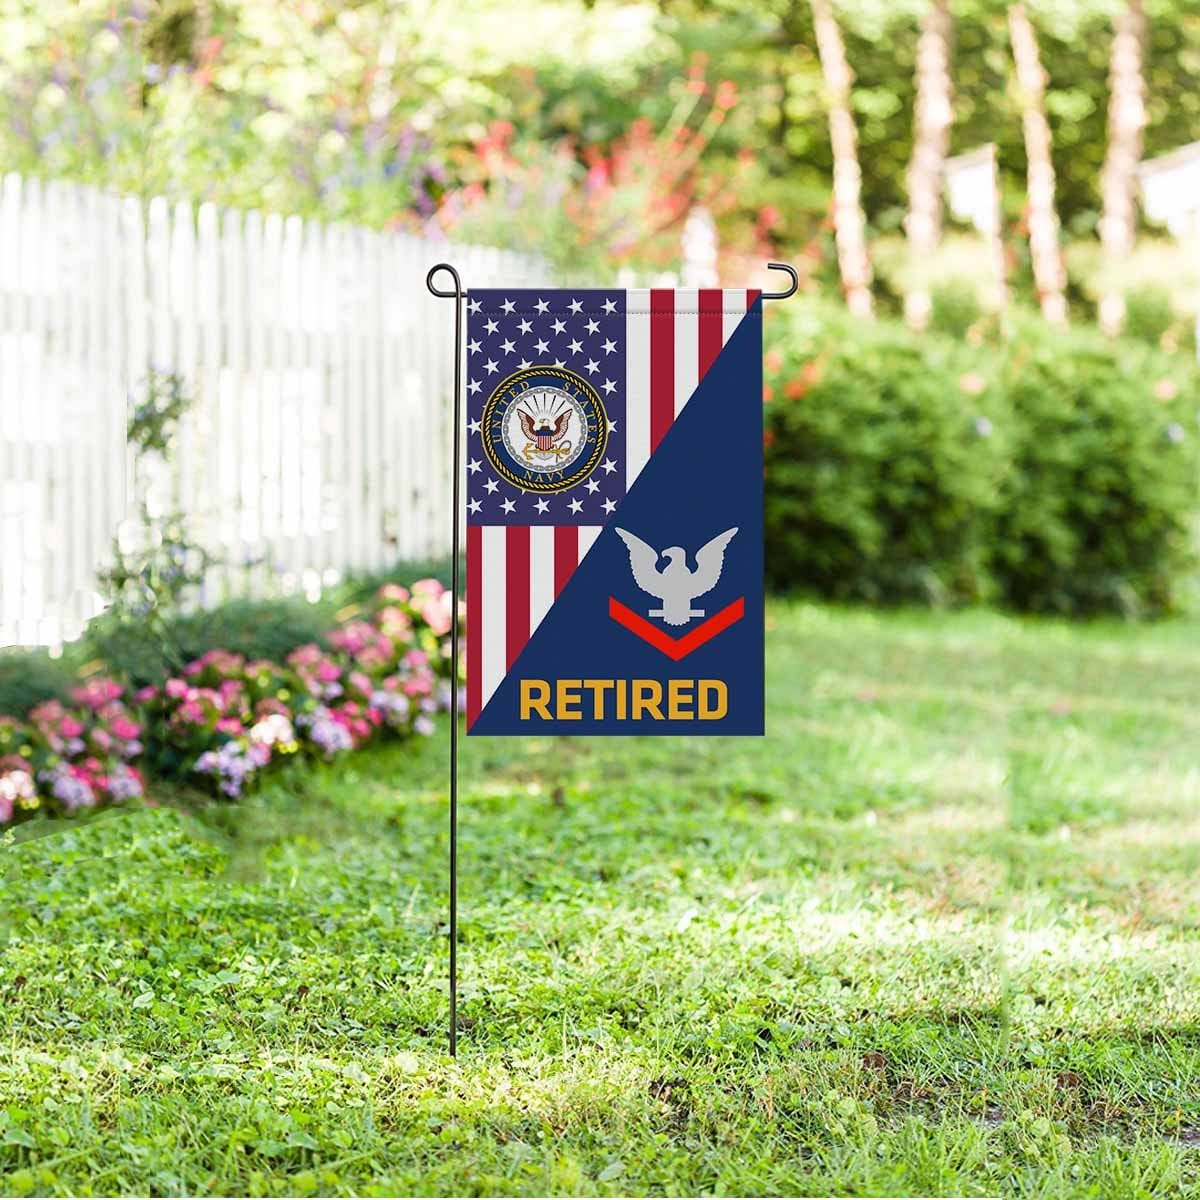 US Navy E-4 Petty Officer Third Class E4 PO3 Collar Device Retired Garden Flag/Yard Flag 12 inches x 18 inches Twin-Side Printing-GDFlag-Navy-Collar-Veterans Nation